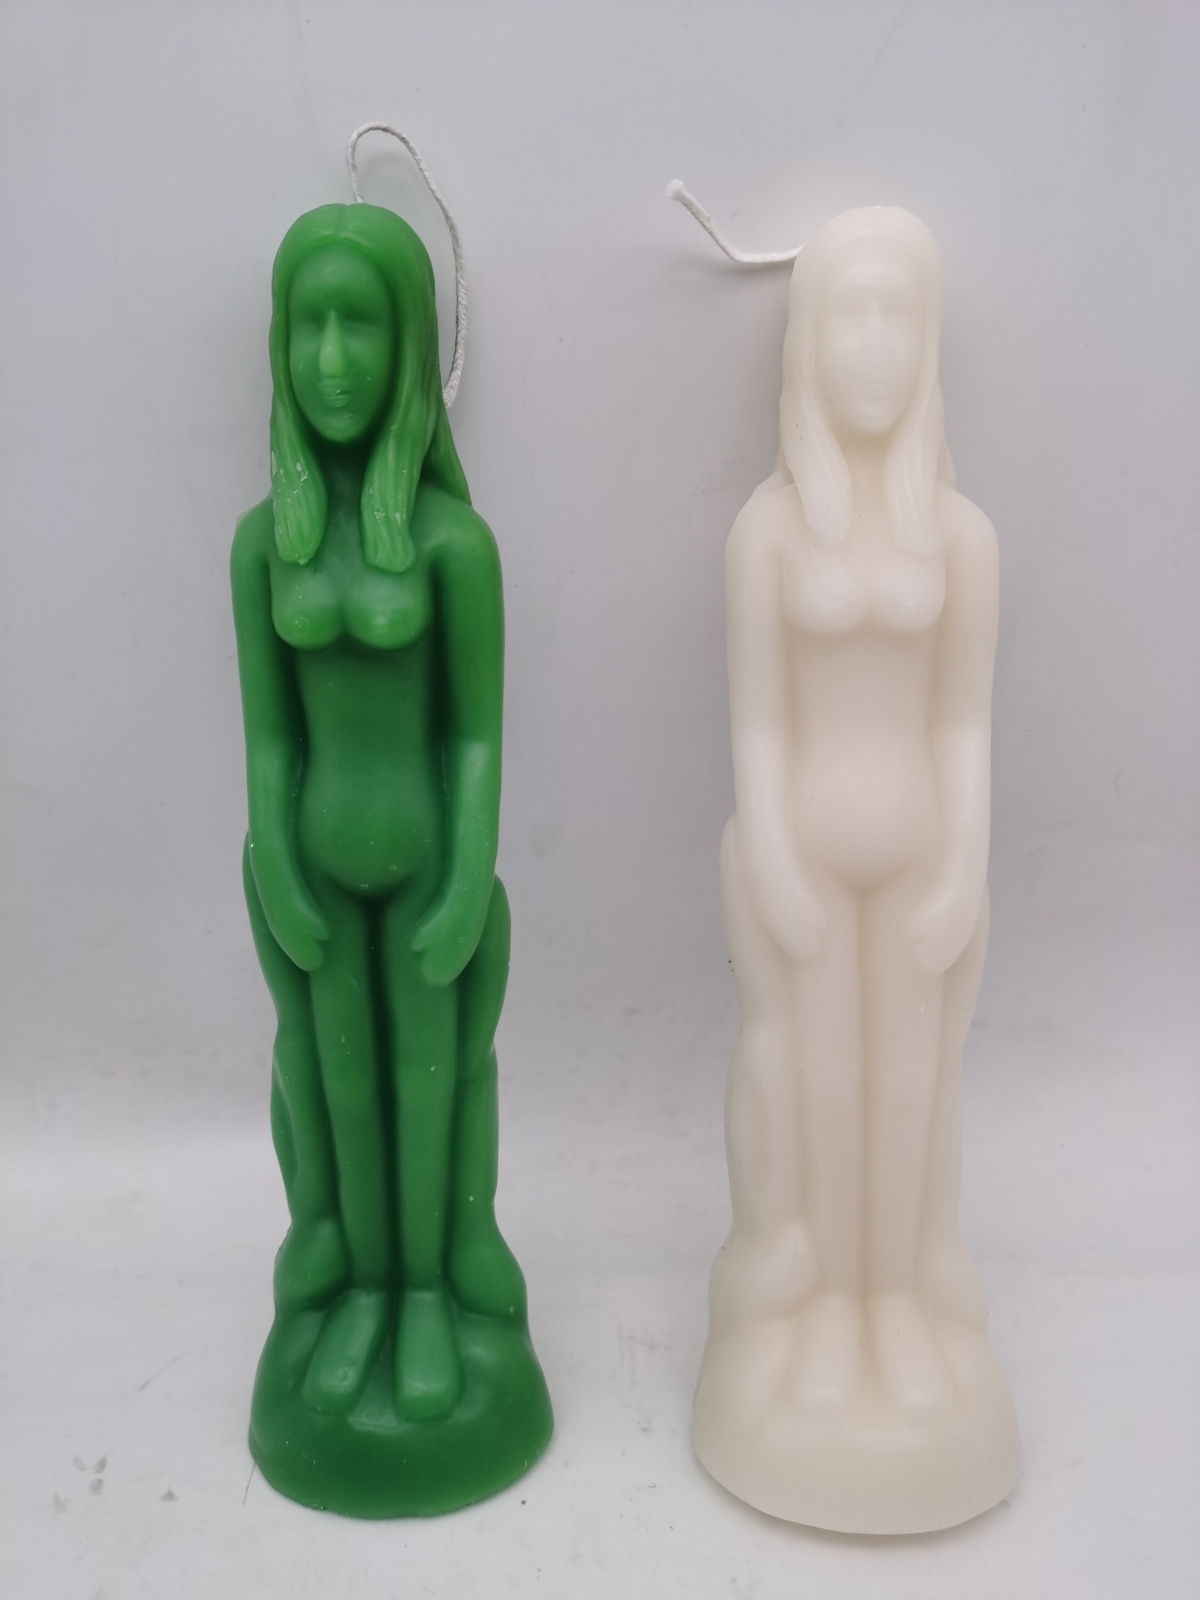 Female Candles ：Luxury Navani ,Female Figure , Torso ,Sculptural Body ,Natural Beeswax ,China Factory ,Price-HOWCANDLE-Candles,Scented Candles,Aromatherapy Candles,Soy Candles,Vegan Candles,Jar Candles,Pillar Candles,Candle Gift Sets,Essential Oils,Reed Diffuser,Candle Holder,